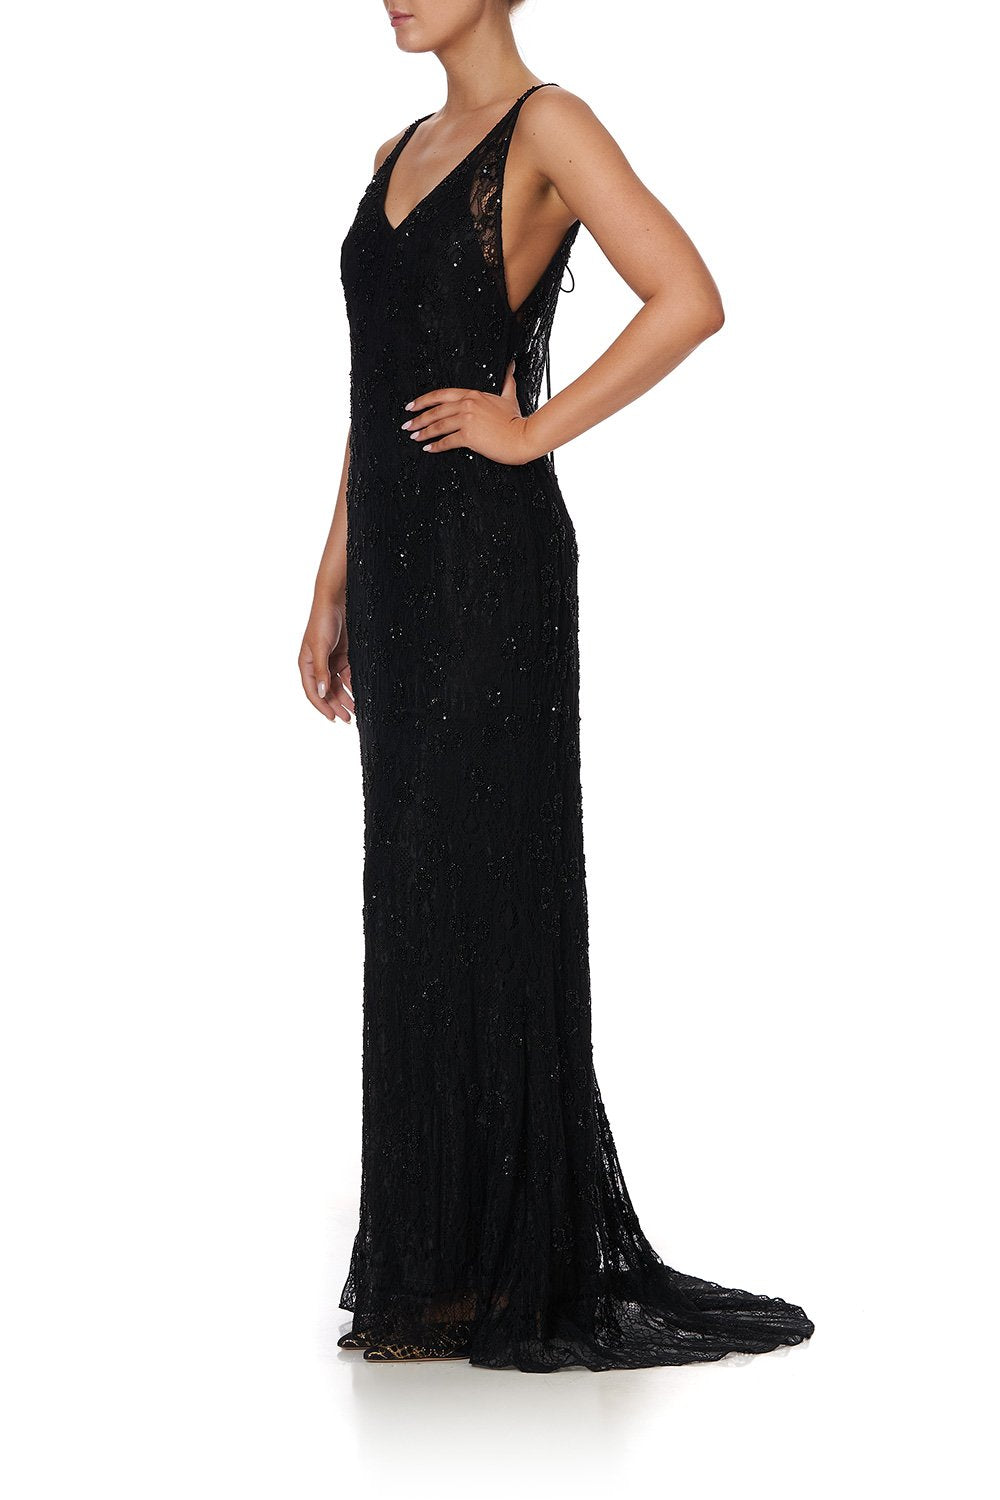 SHEER LACE GOWN BLACK